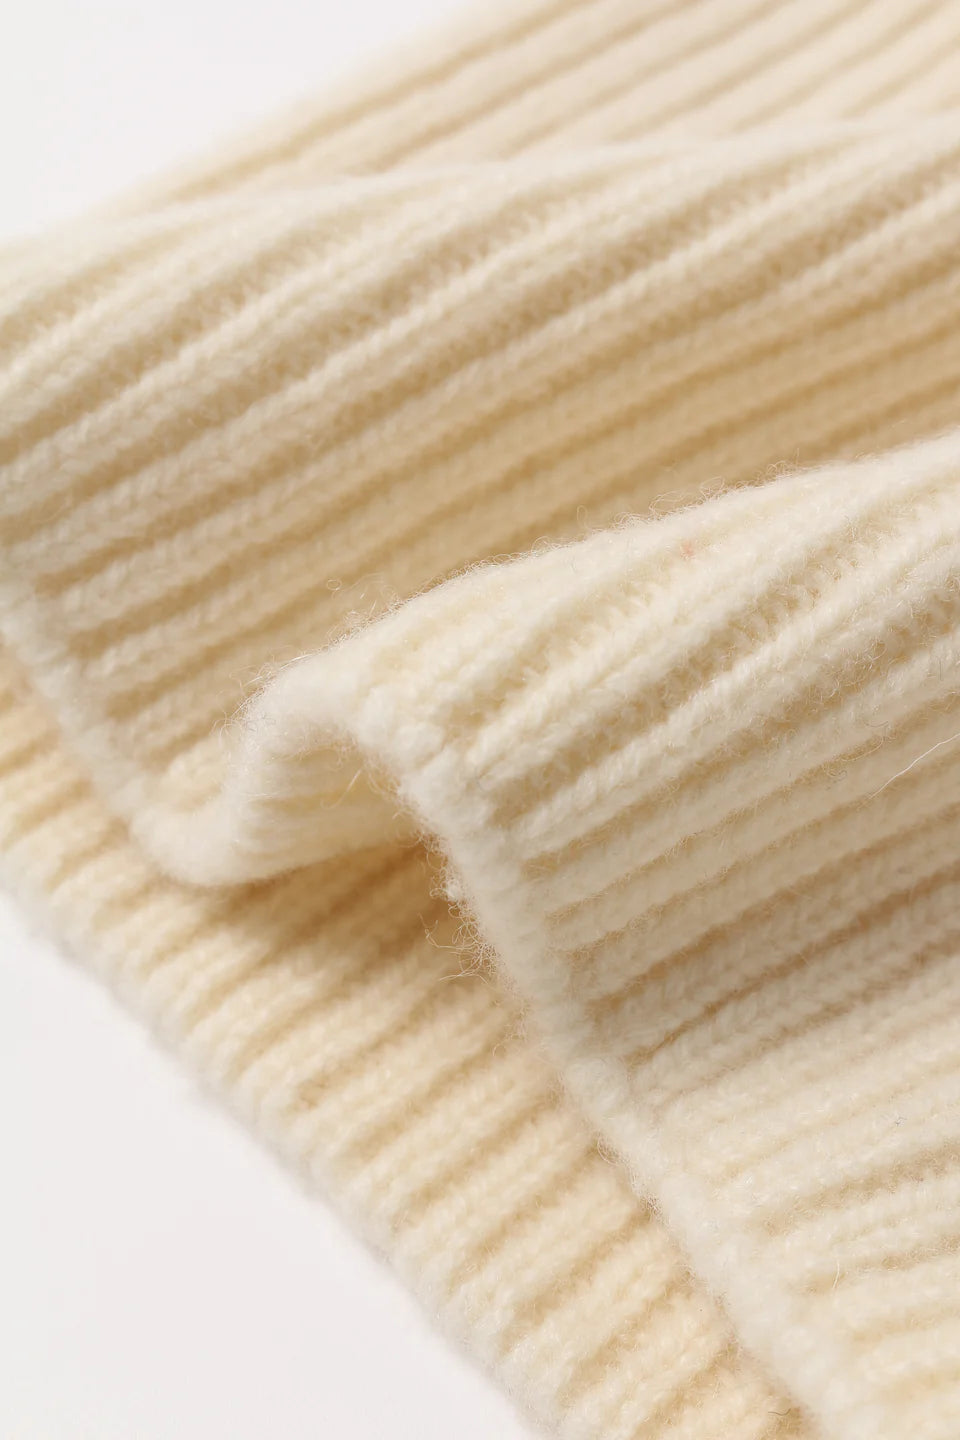 Taylor Cashmere Wool Beanie - Camel/Ivory/Oatmeal